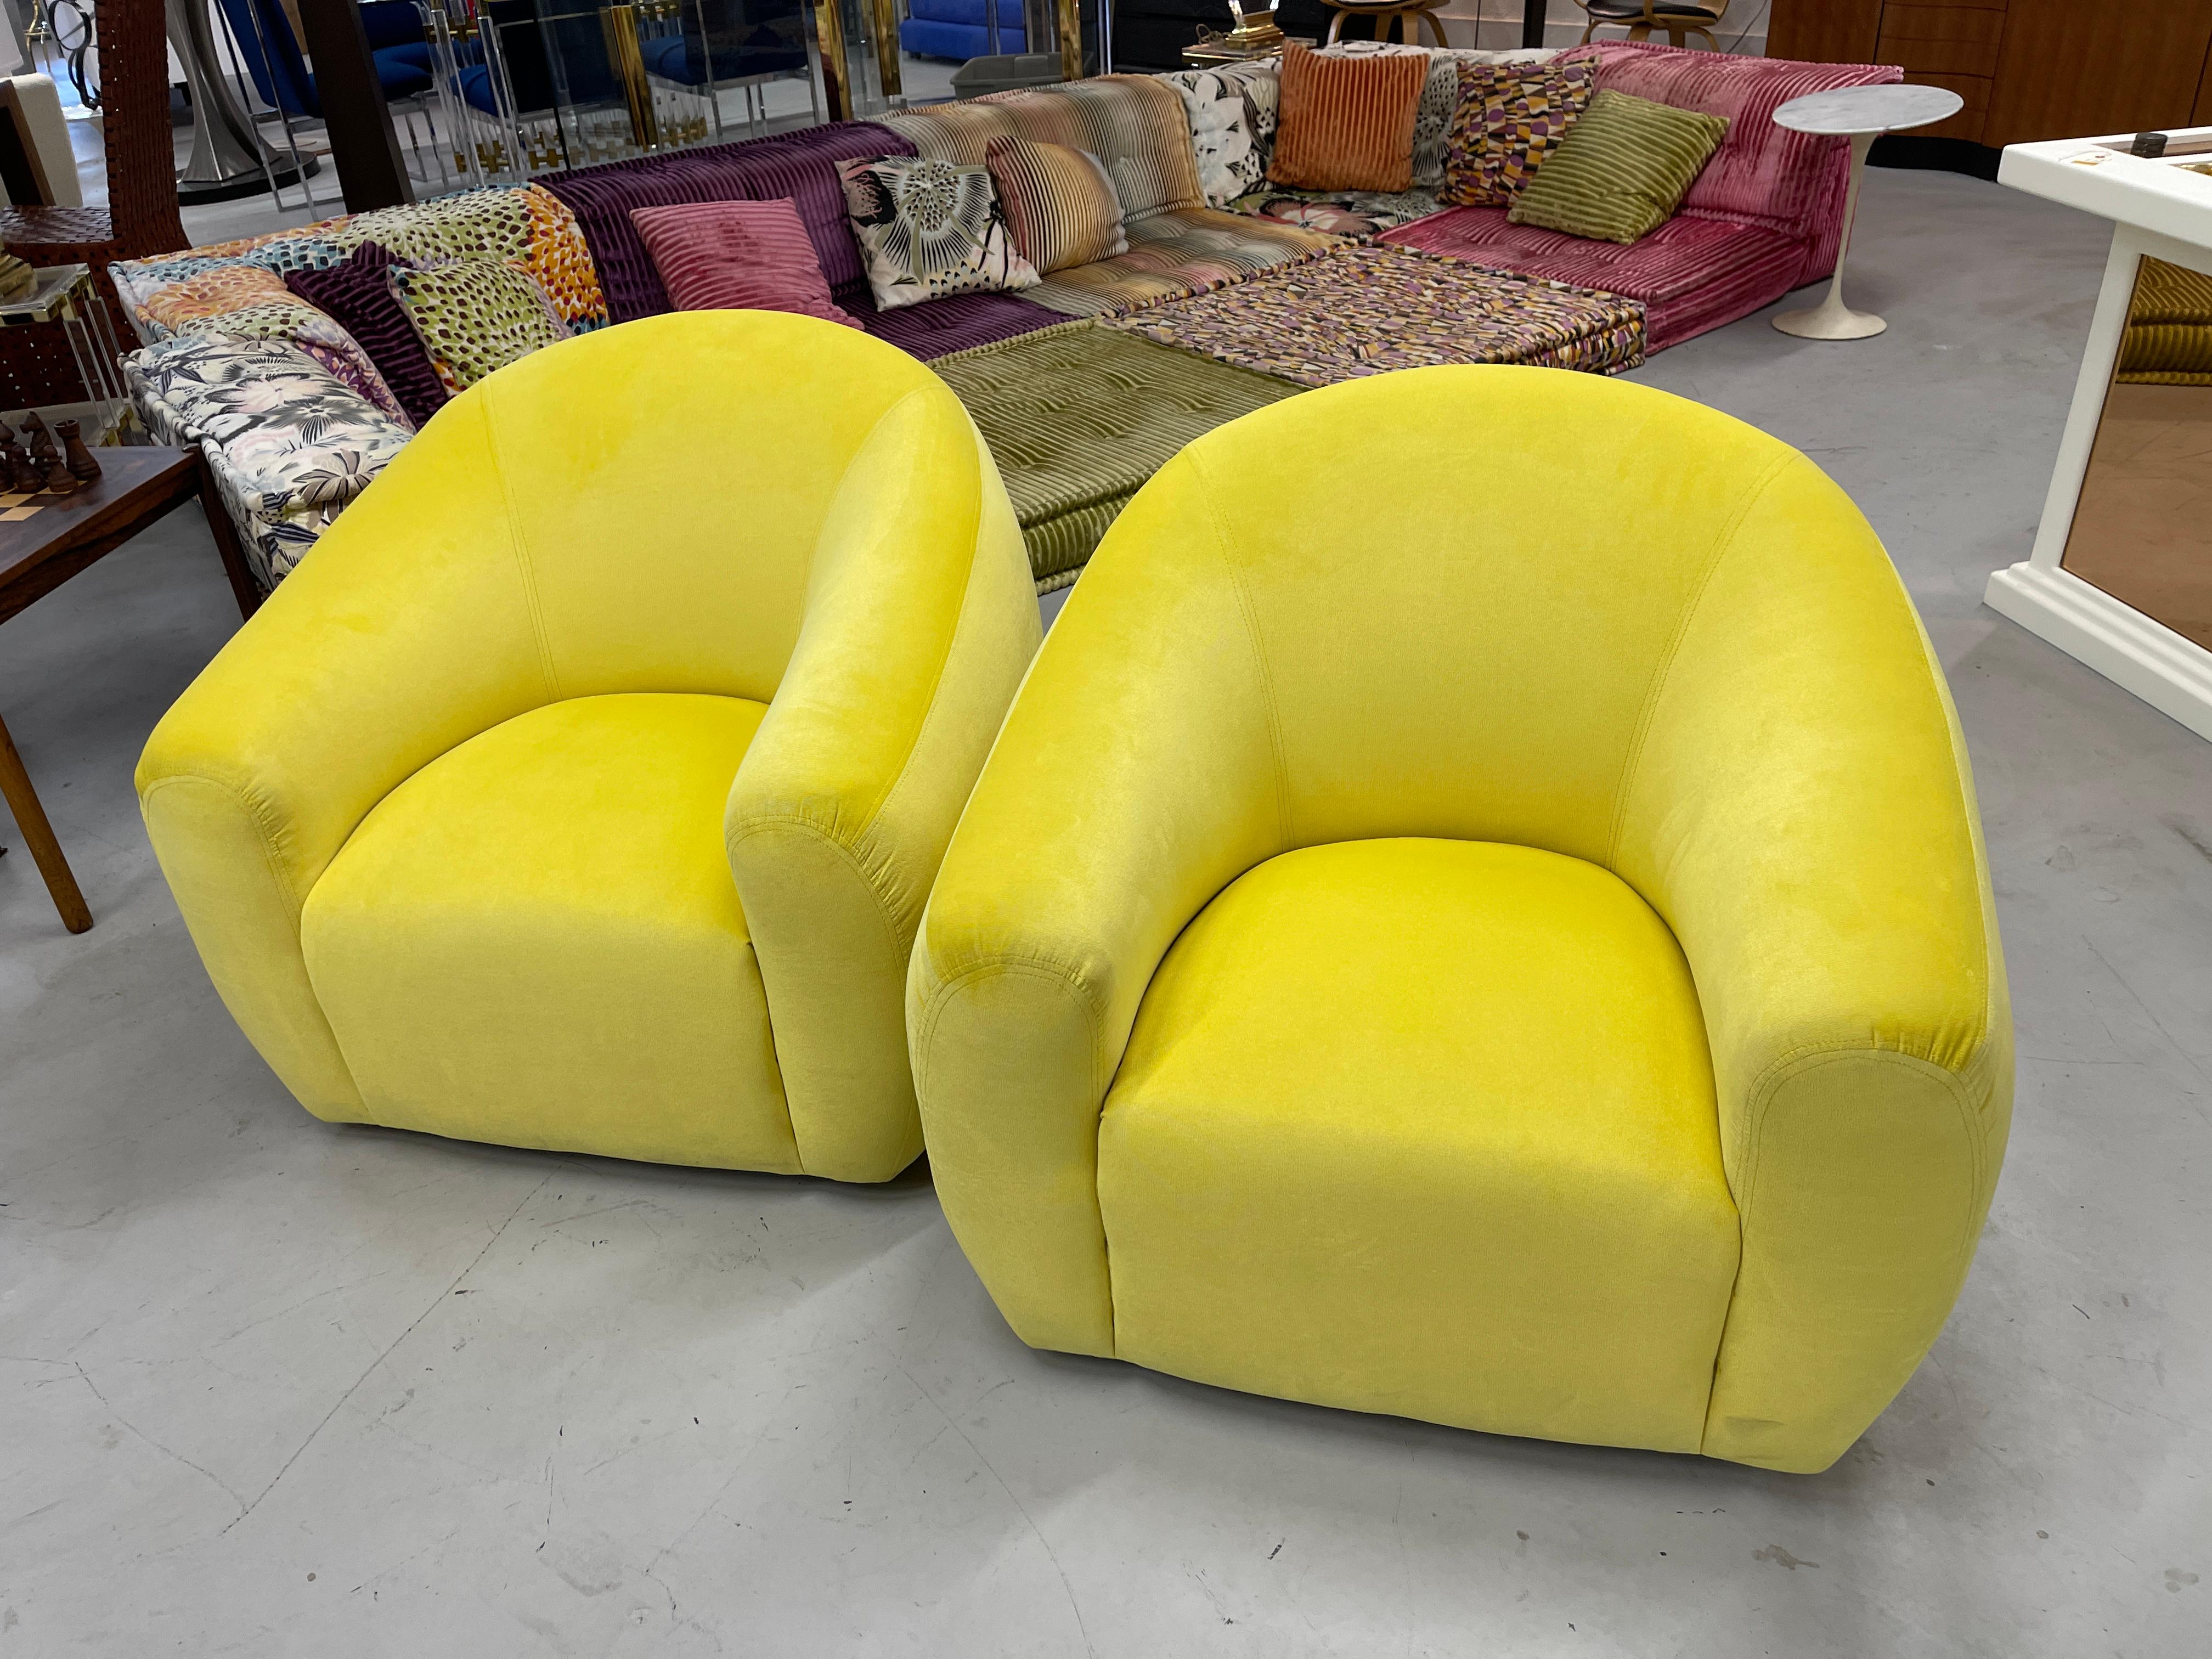 A Rudin Swivel Chairs in Limon Kravet Fabric 2